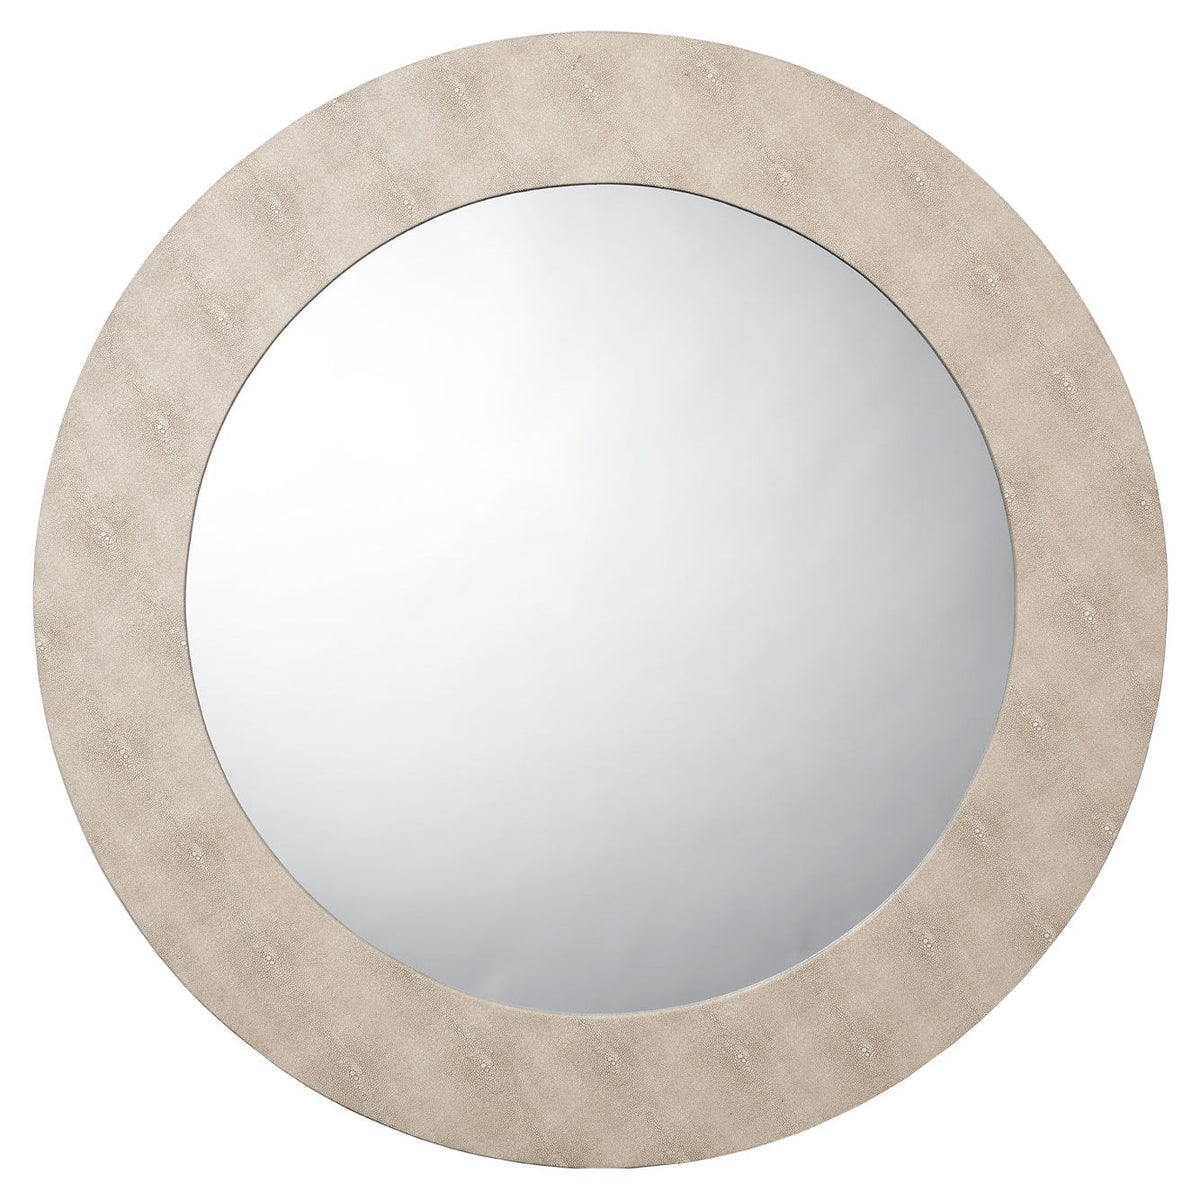 Jamie Young Company - LS6CHESRNDIV - Chester Round Mirror - Chester - Ivory